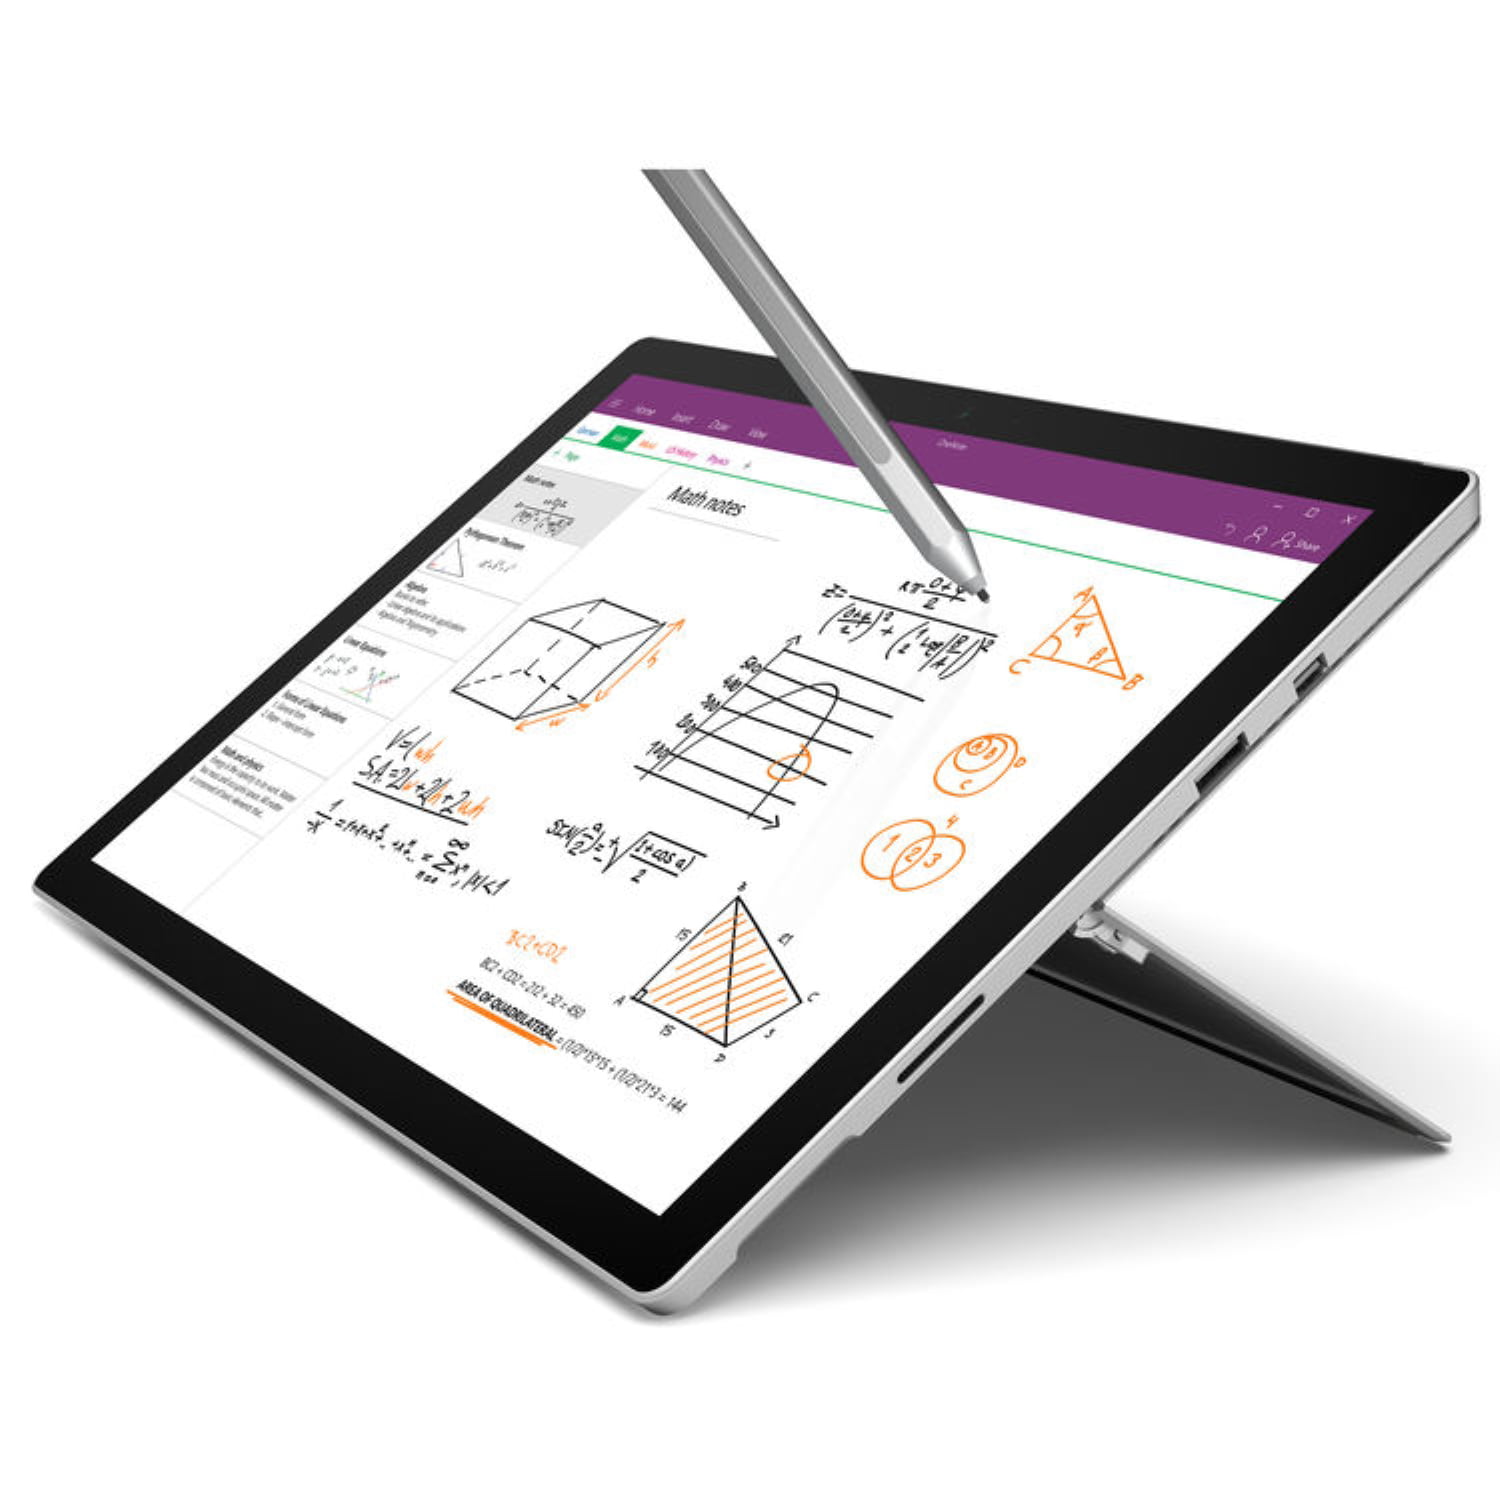 Microsoft Surface Pro 4 12.3" Tablet (256GB, 8GB RAM, Intel Core i7) - CQ9-00001 (Non-Retail Packaging)